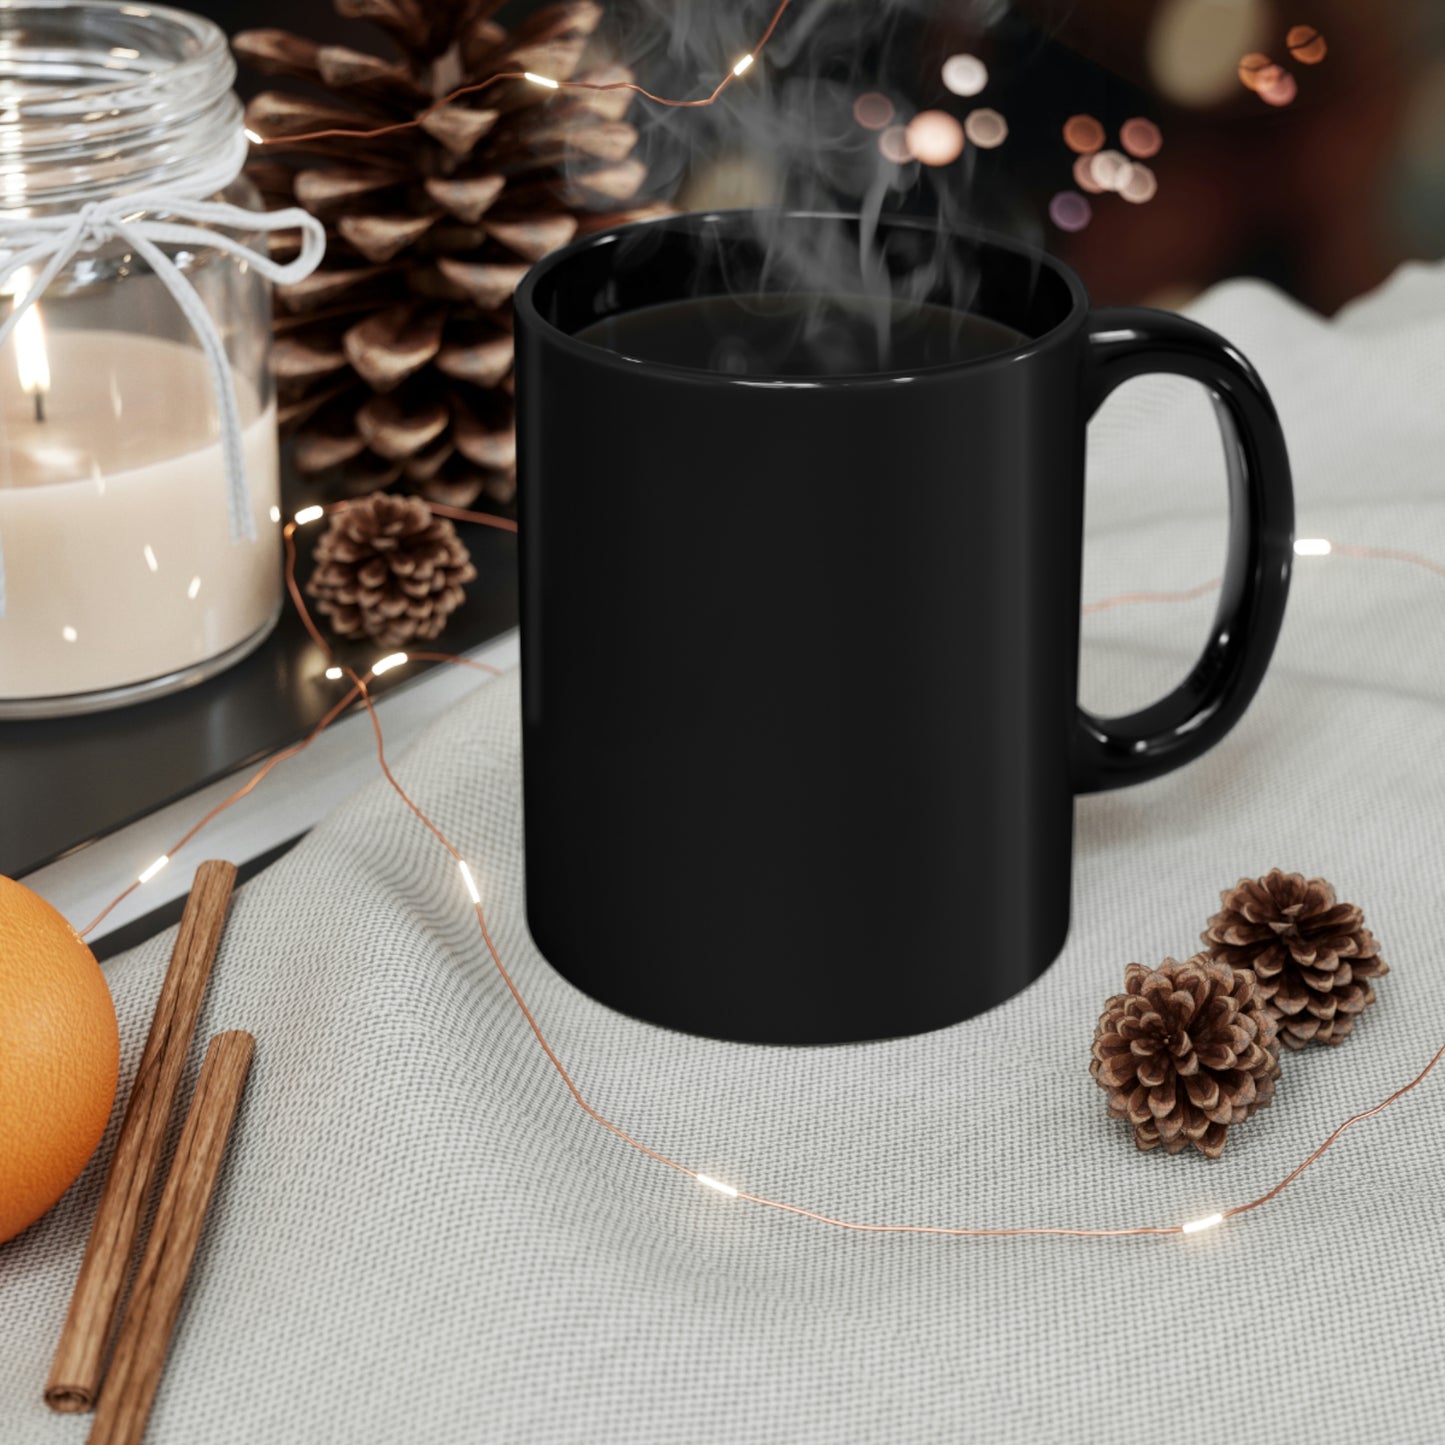 Don’t fuck with me in morning- 11oz Black Mug